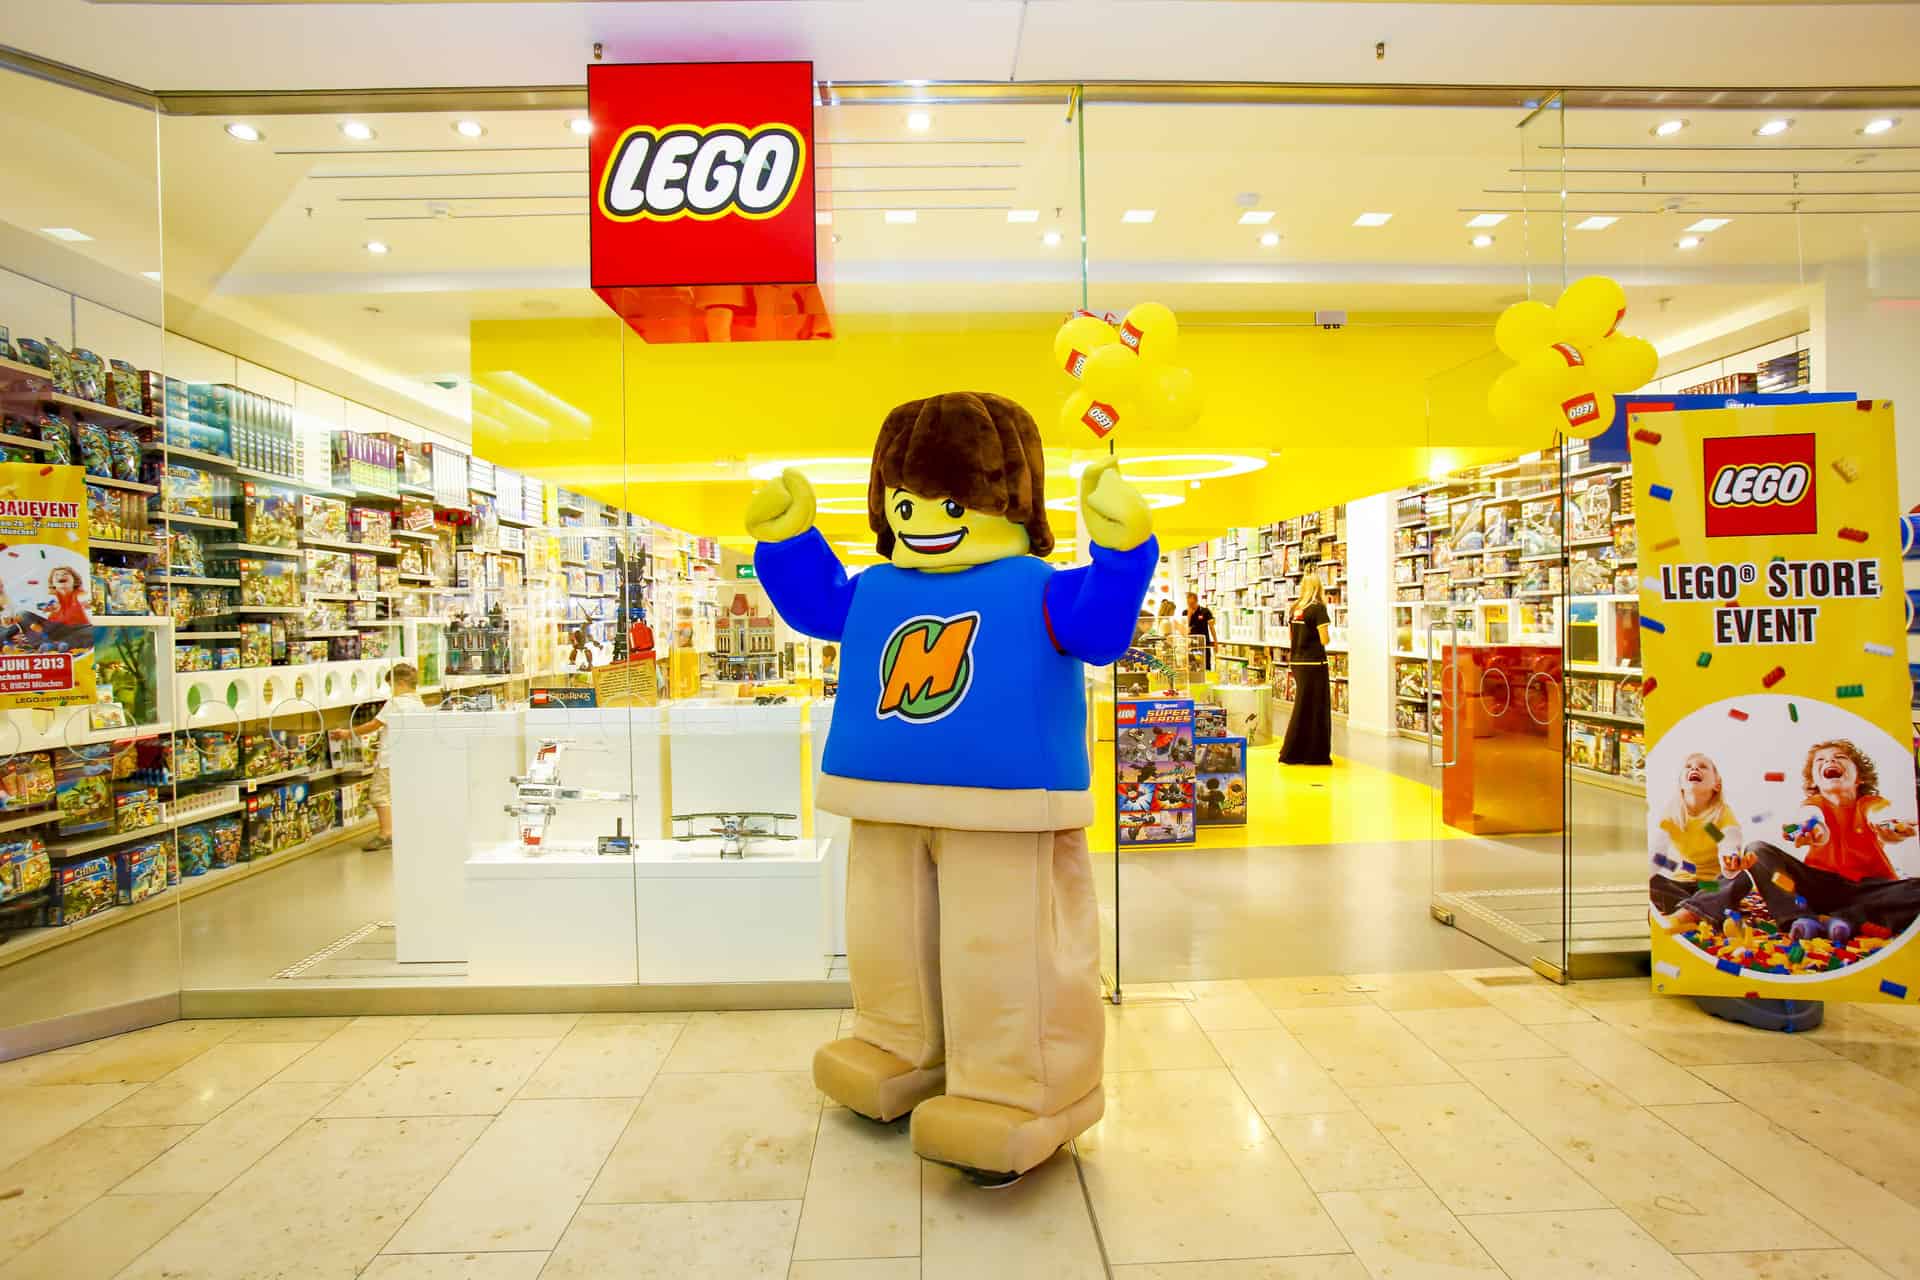 Do This Weekly Building Challenges For Kids At The Lego Store Raising Edmonton